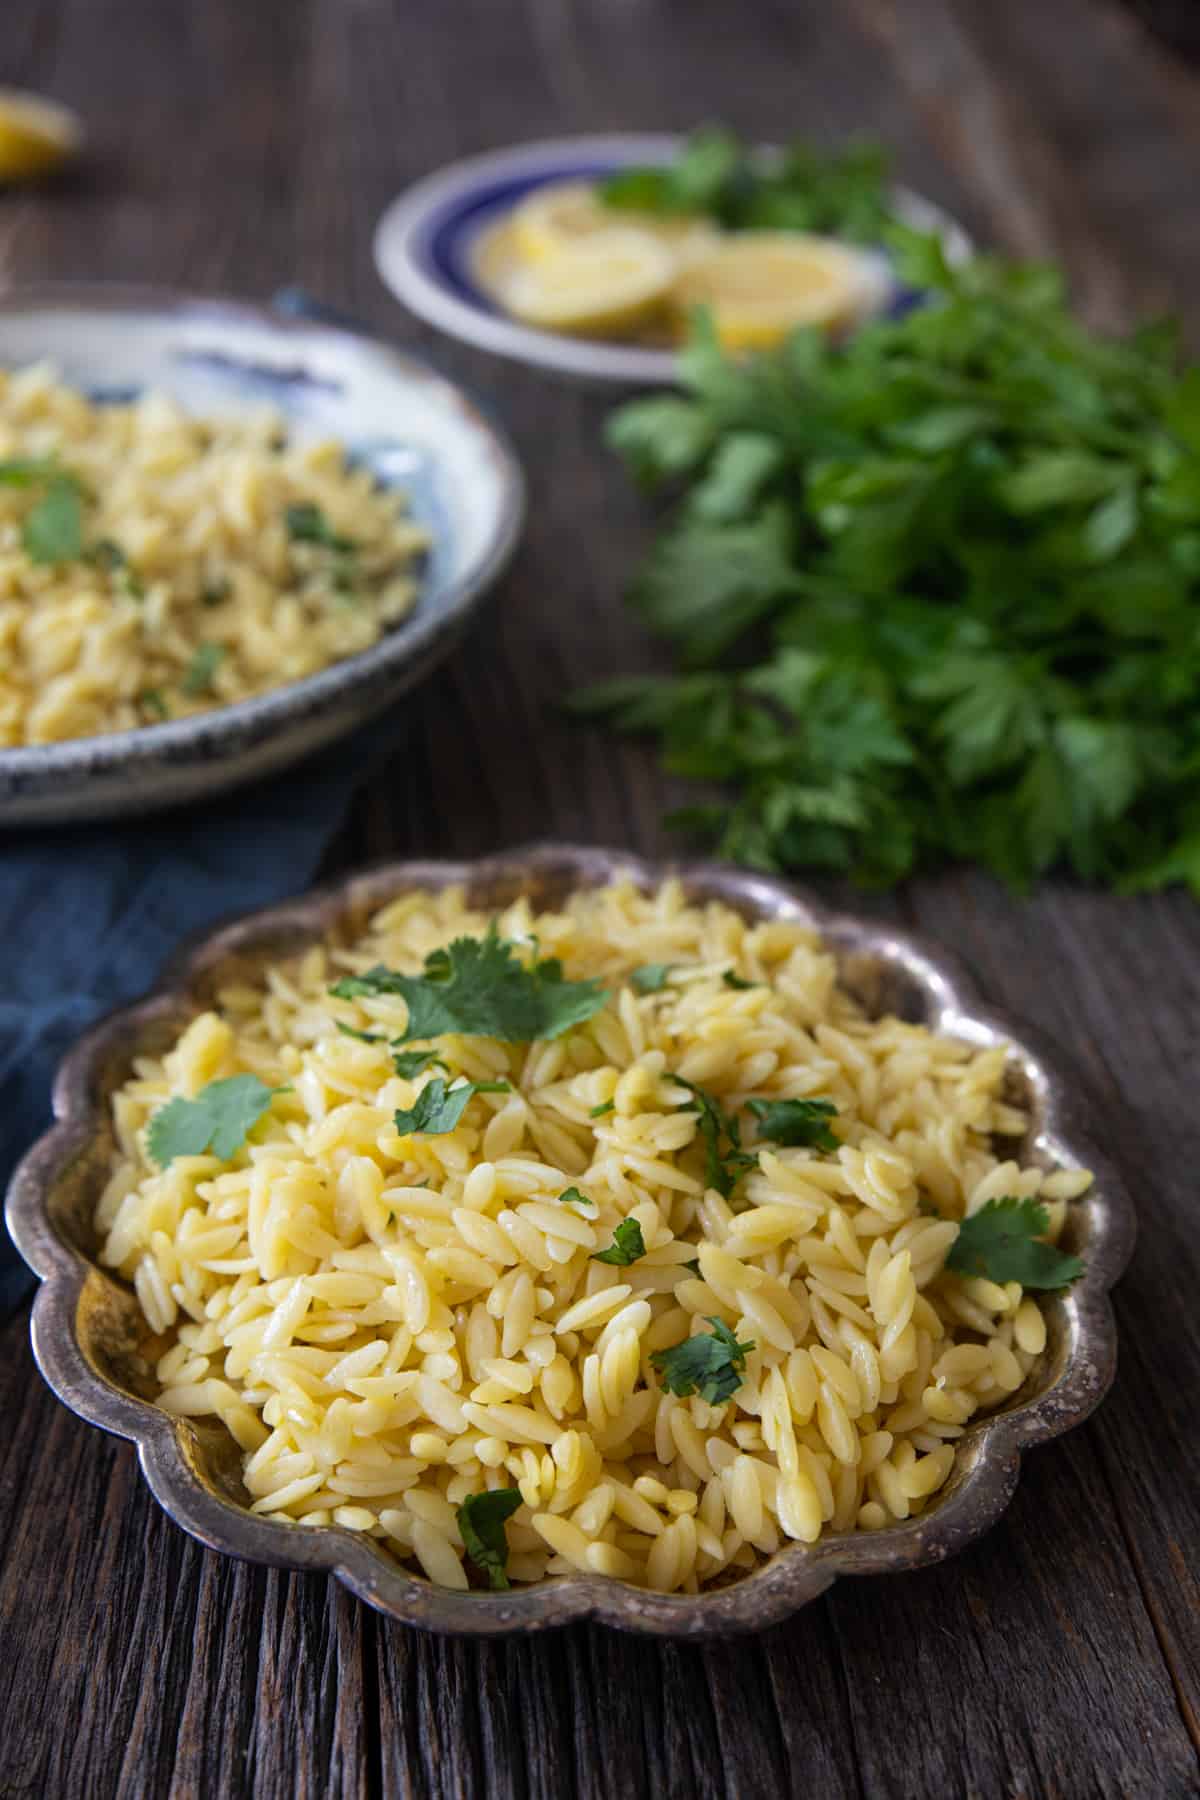 Orzo cooked in water. 